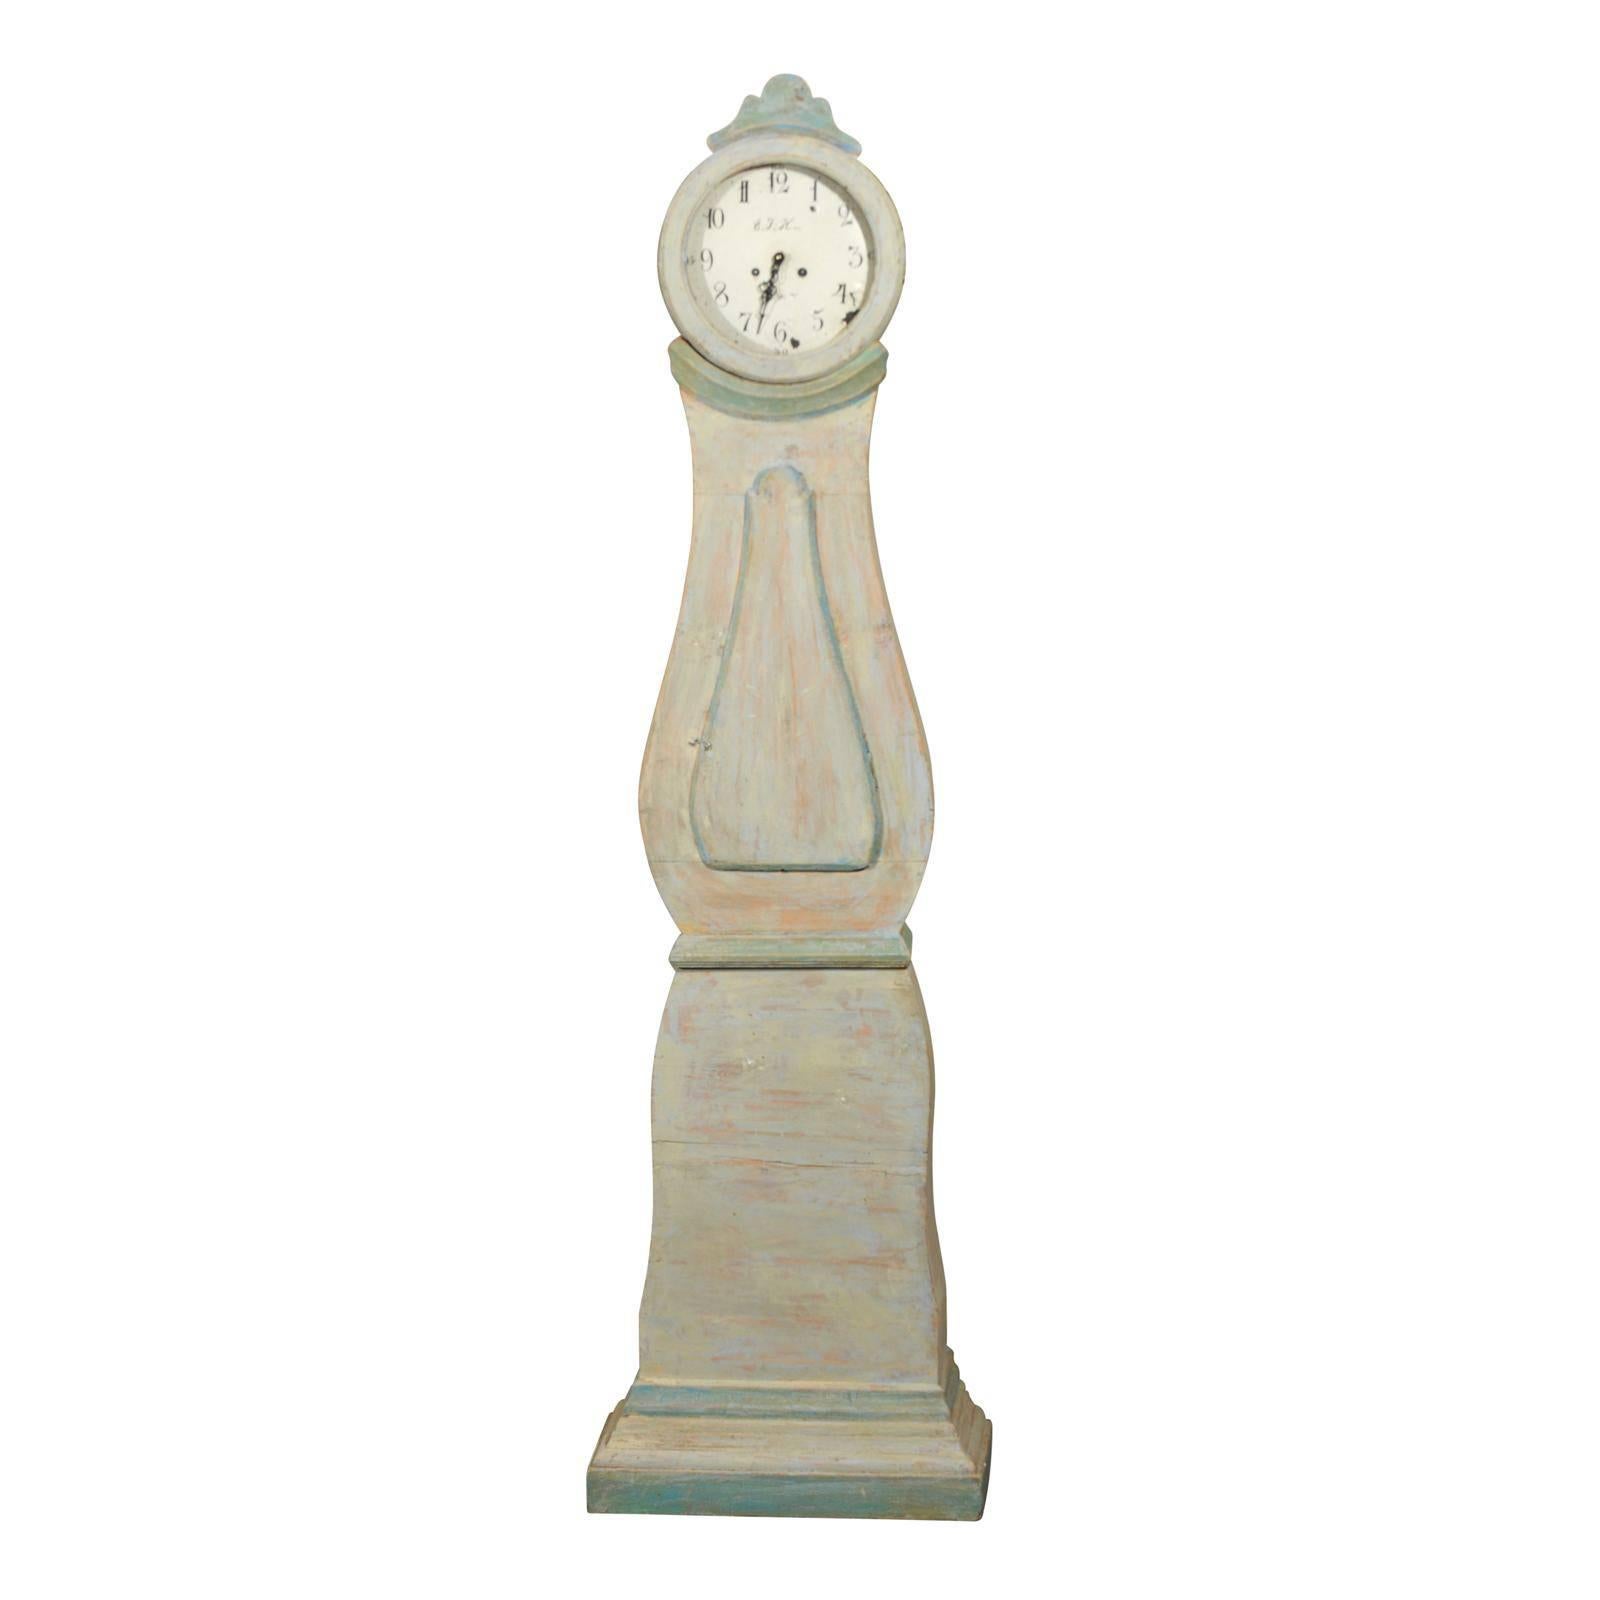 Swedish Mora Clock from the 19th Century with Light Grey Hue and Green Accents